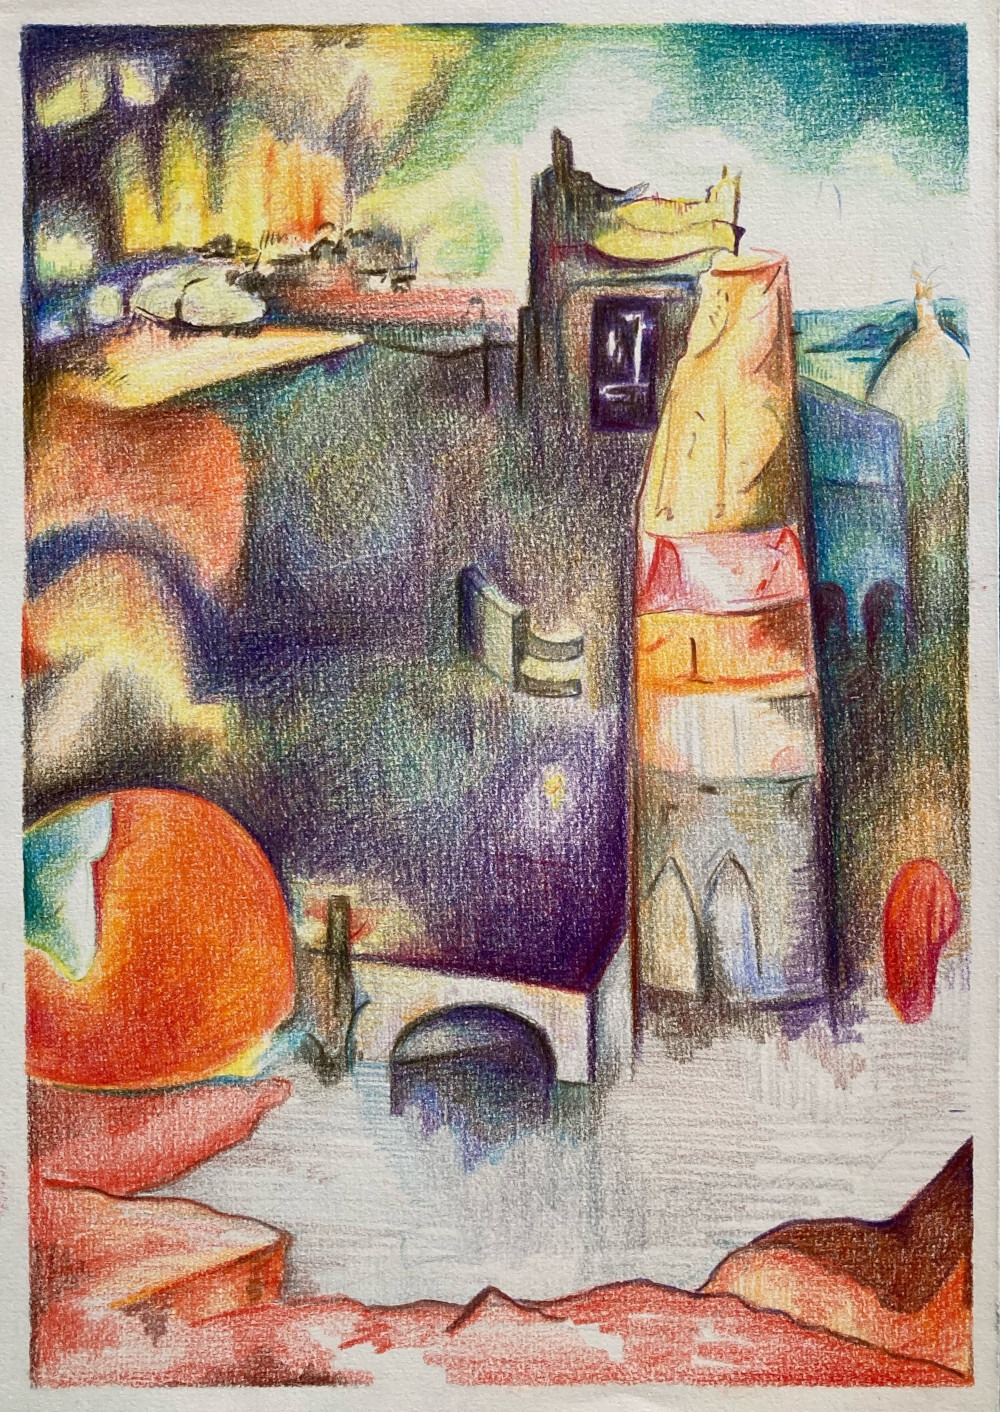 Wouter van de Koot drawing color pencil on paper tower cityscape medieval bosch